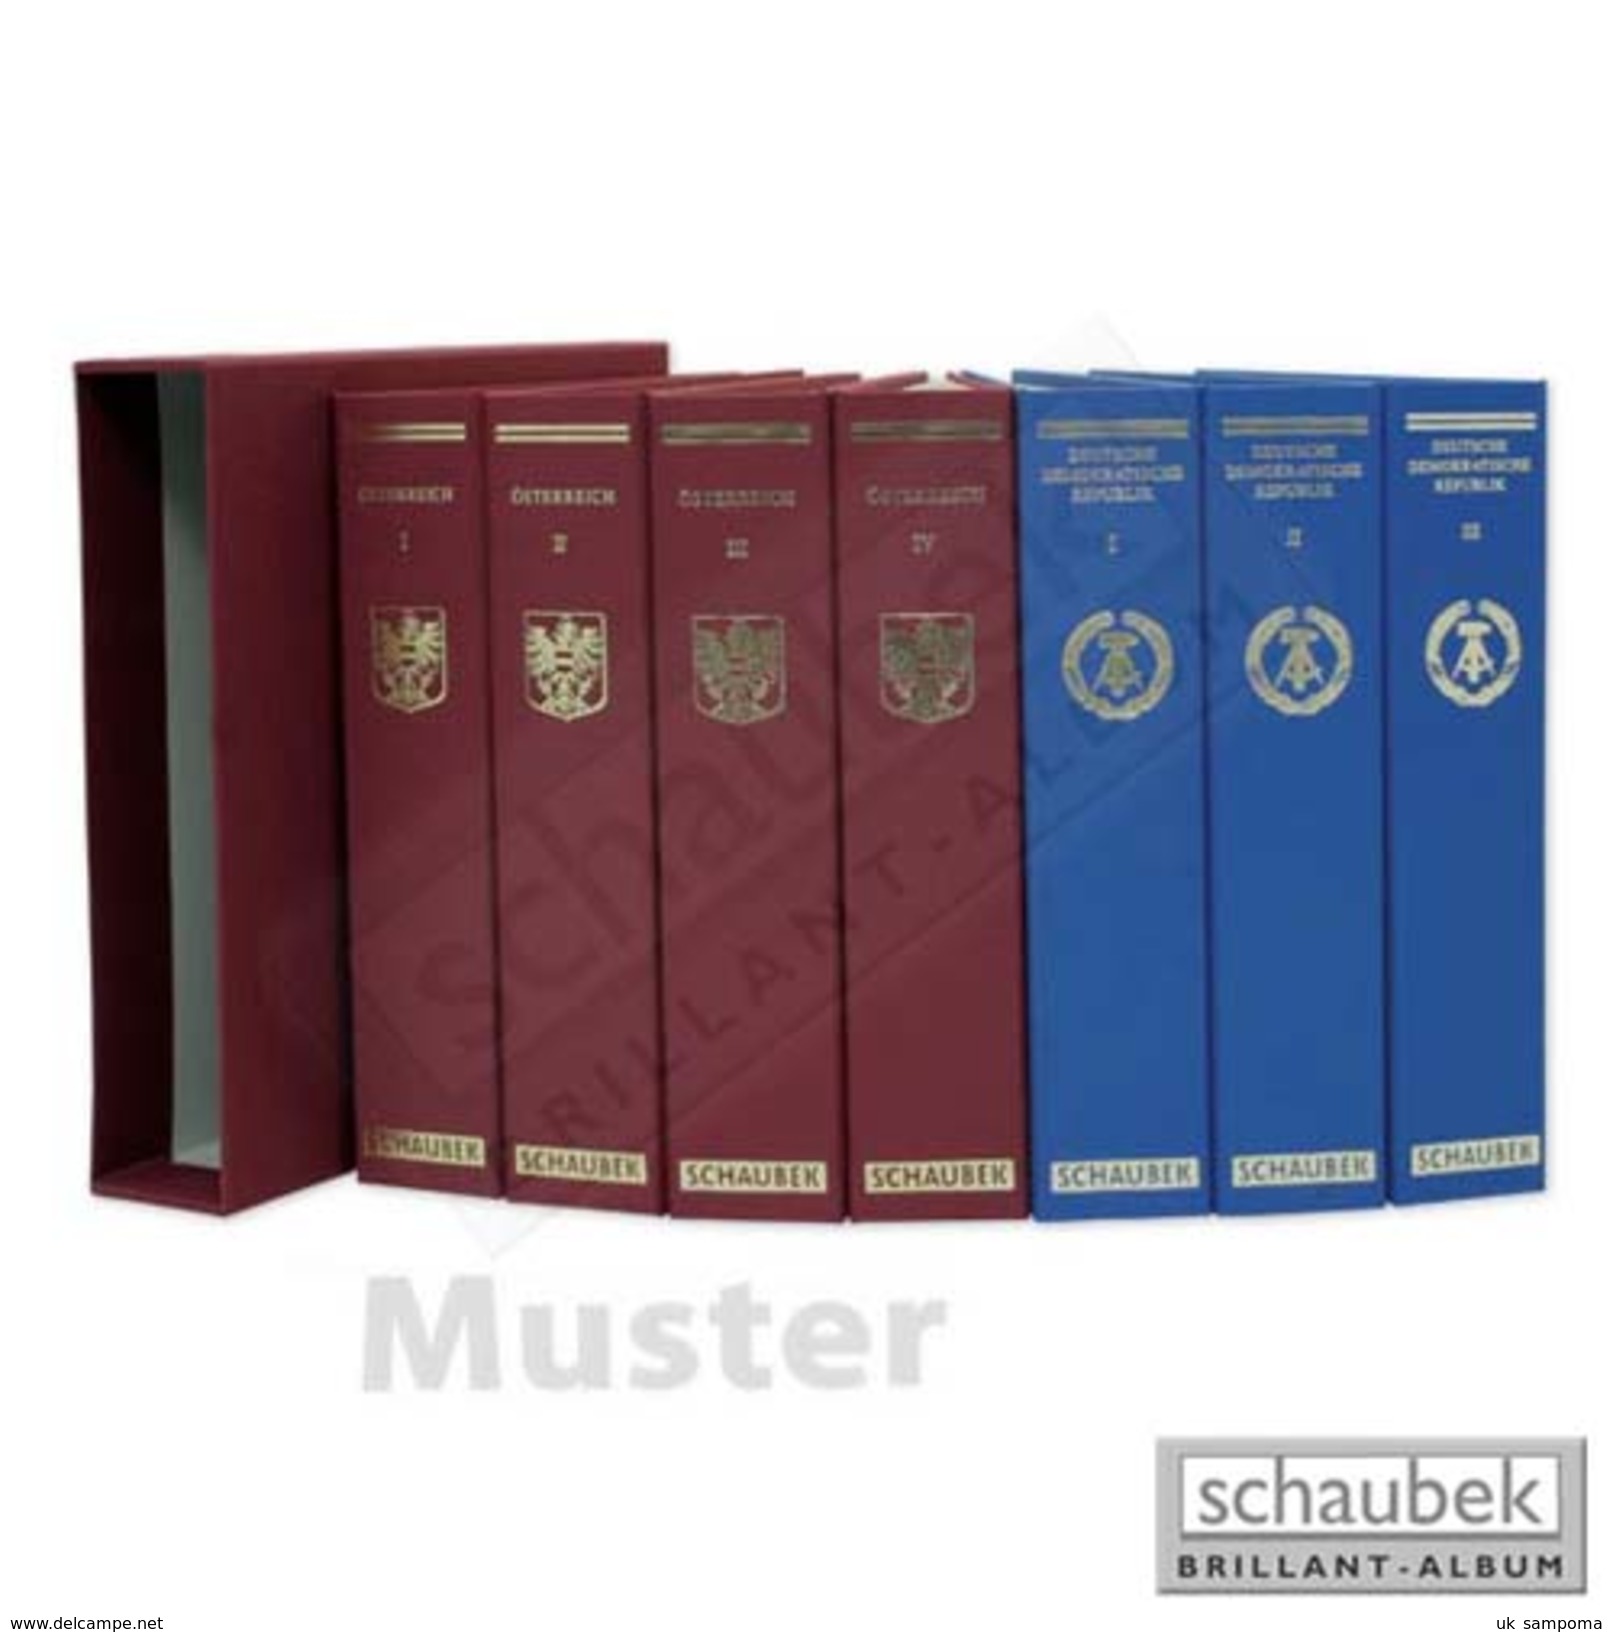 Schaubek A-807/03B Album Czechoslovakia 1960-1969 Brillant, In A Blue Screw Post Binder, Vol. III, Without Slipcase - Binders With Pages